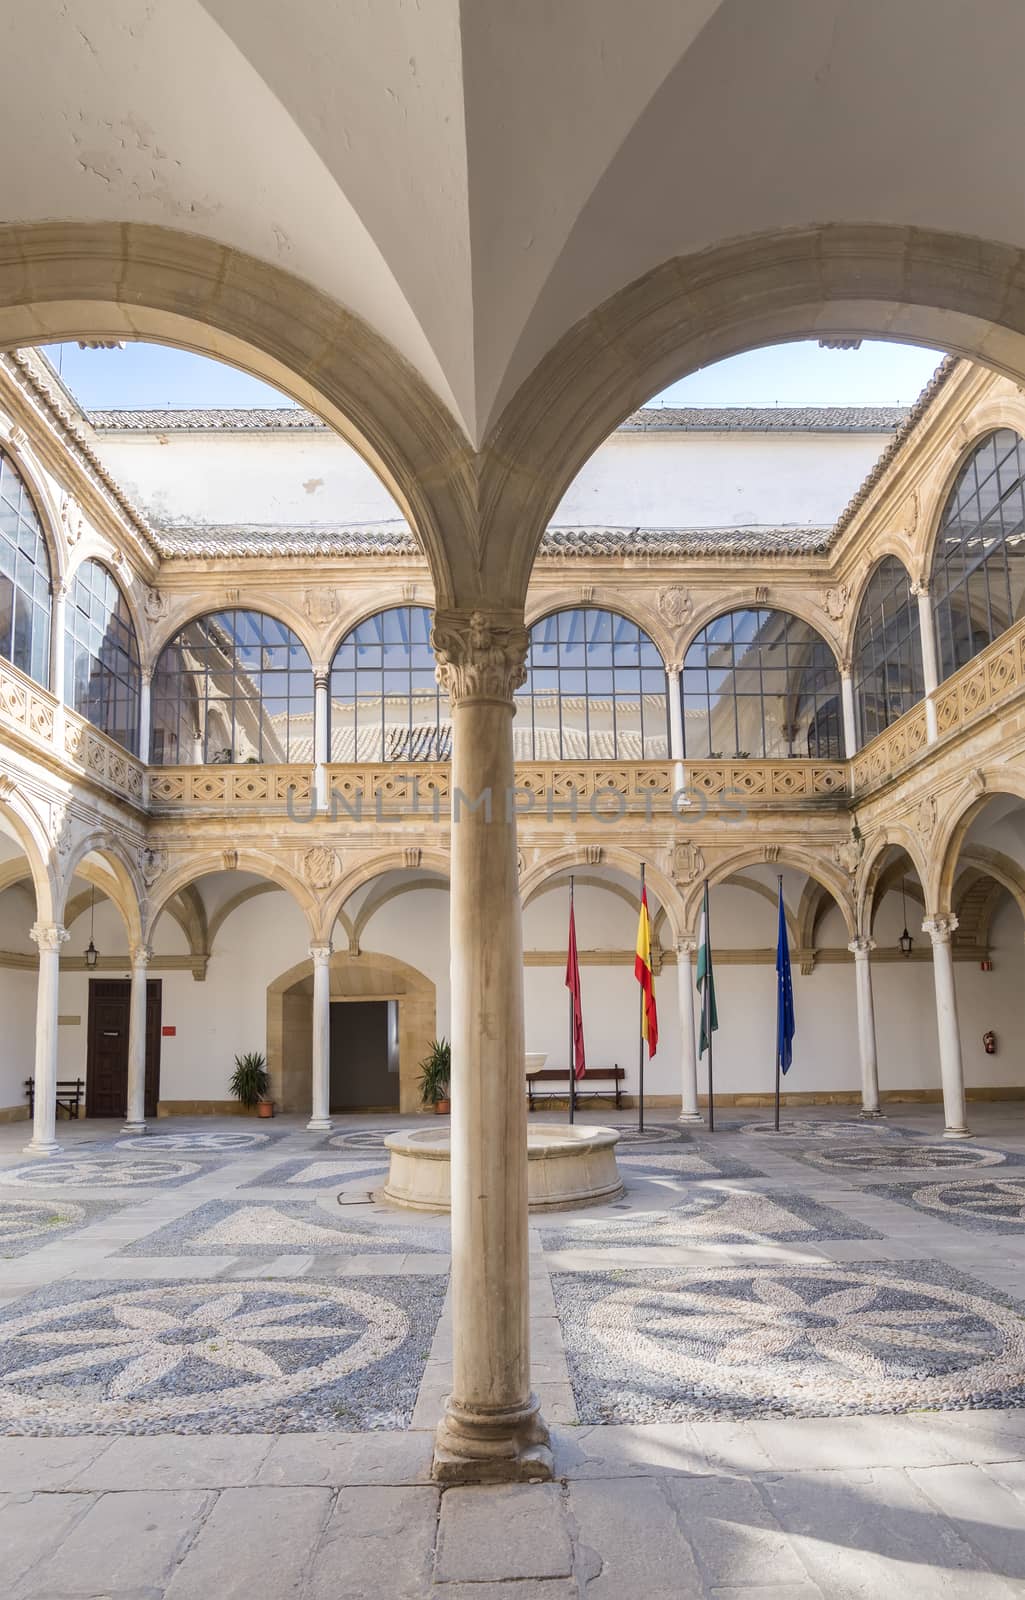 Vazquez de Molina Palace (Palace of the Chains) courtyard, Ubeda by max8xam